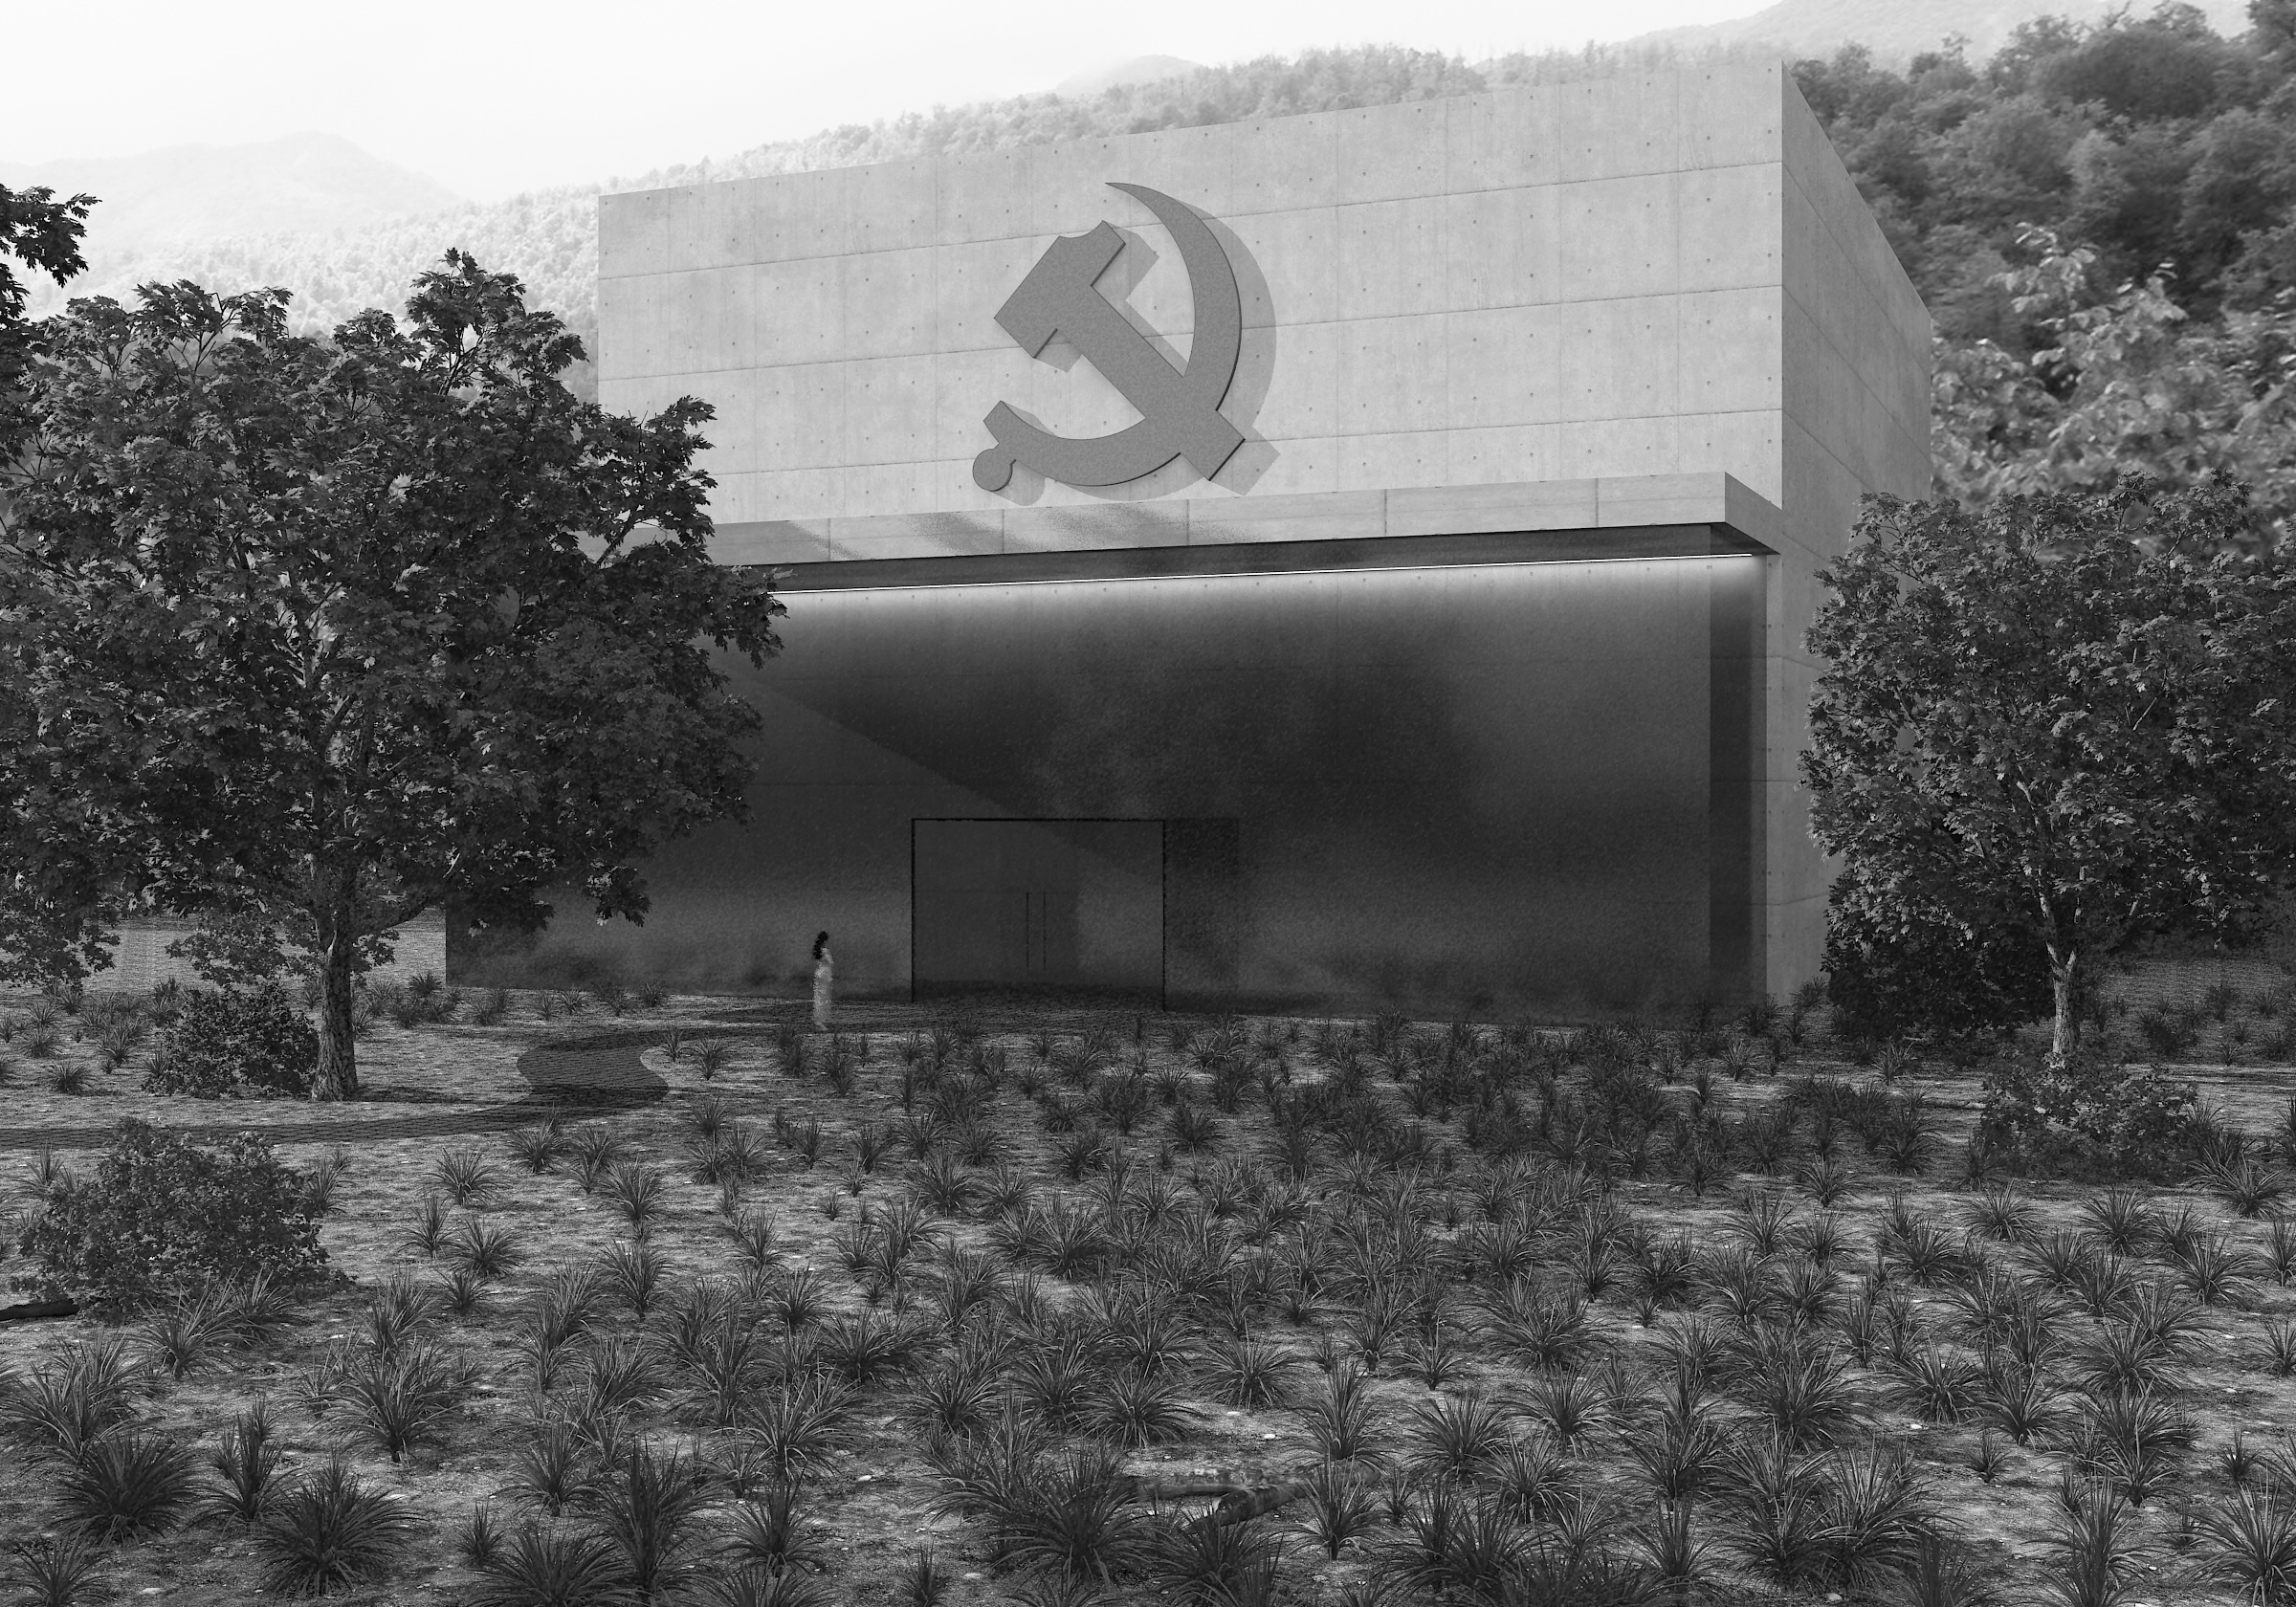 General 2400x1680 communism architecture hammer and sickle China monochrome